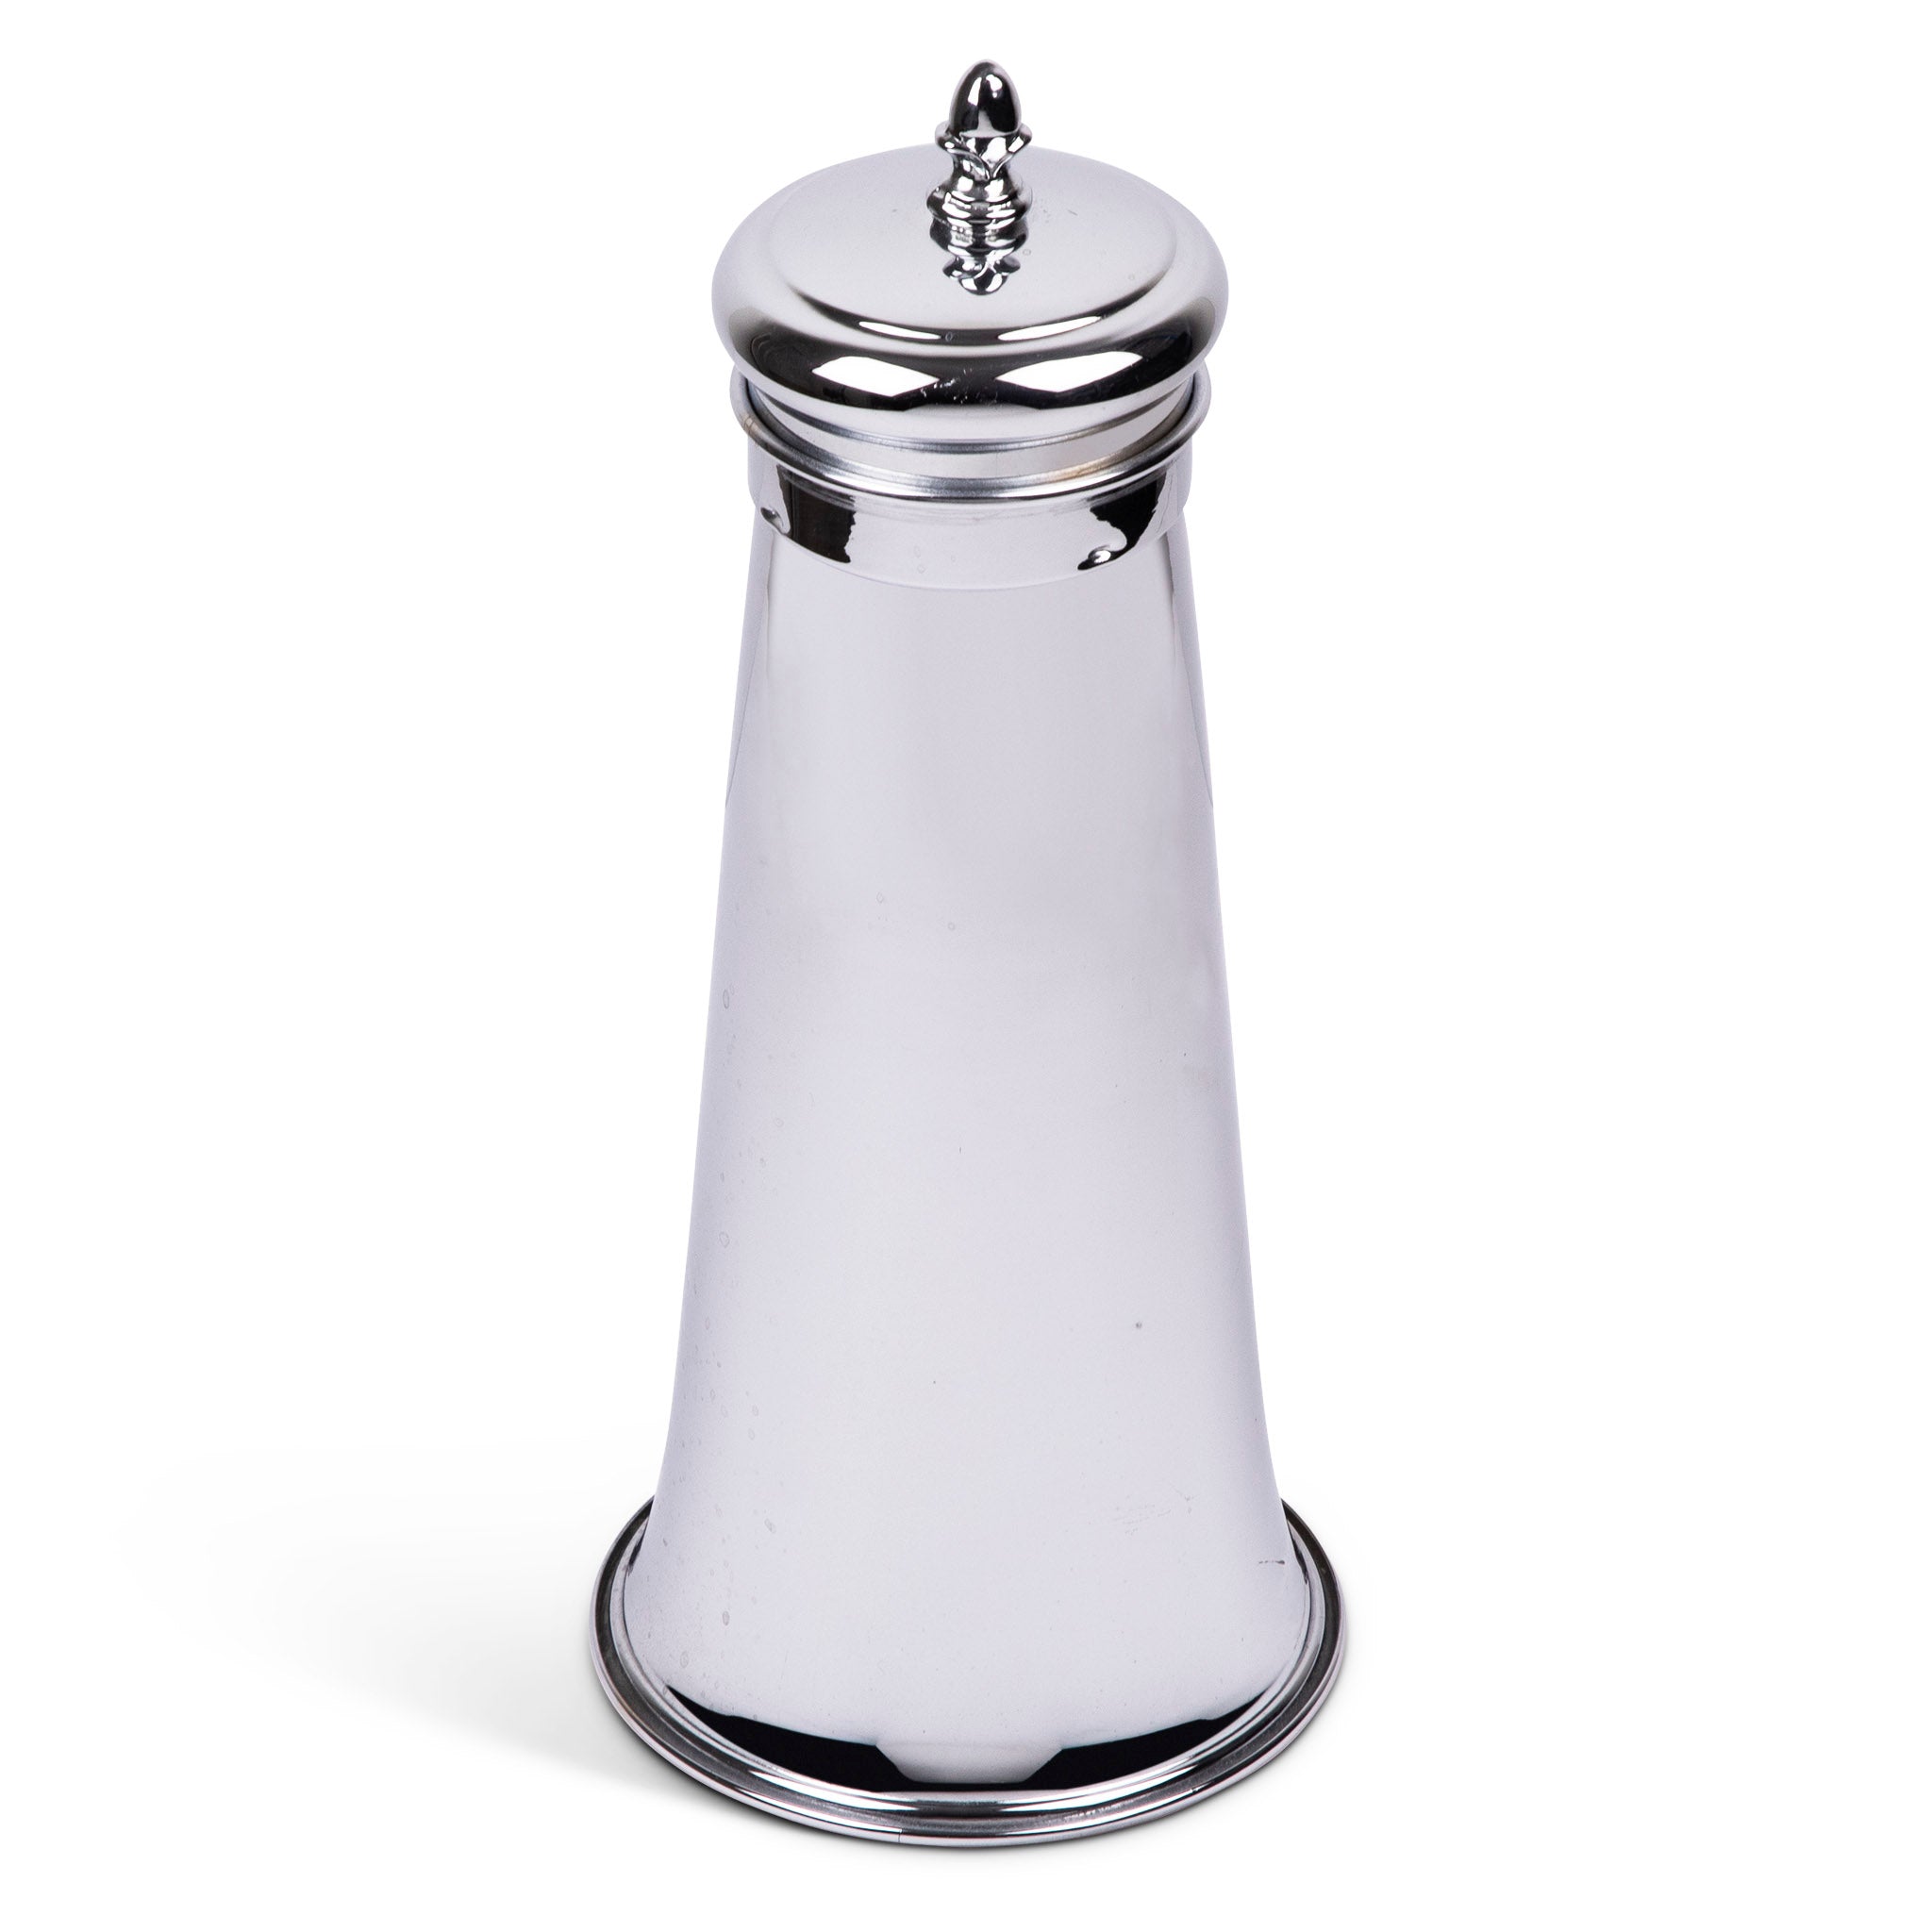 Forman Brothers Chrome Lighthouse Cocktail Shaker